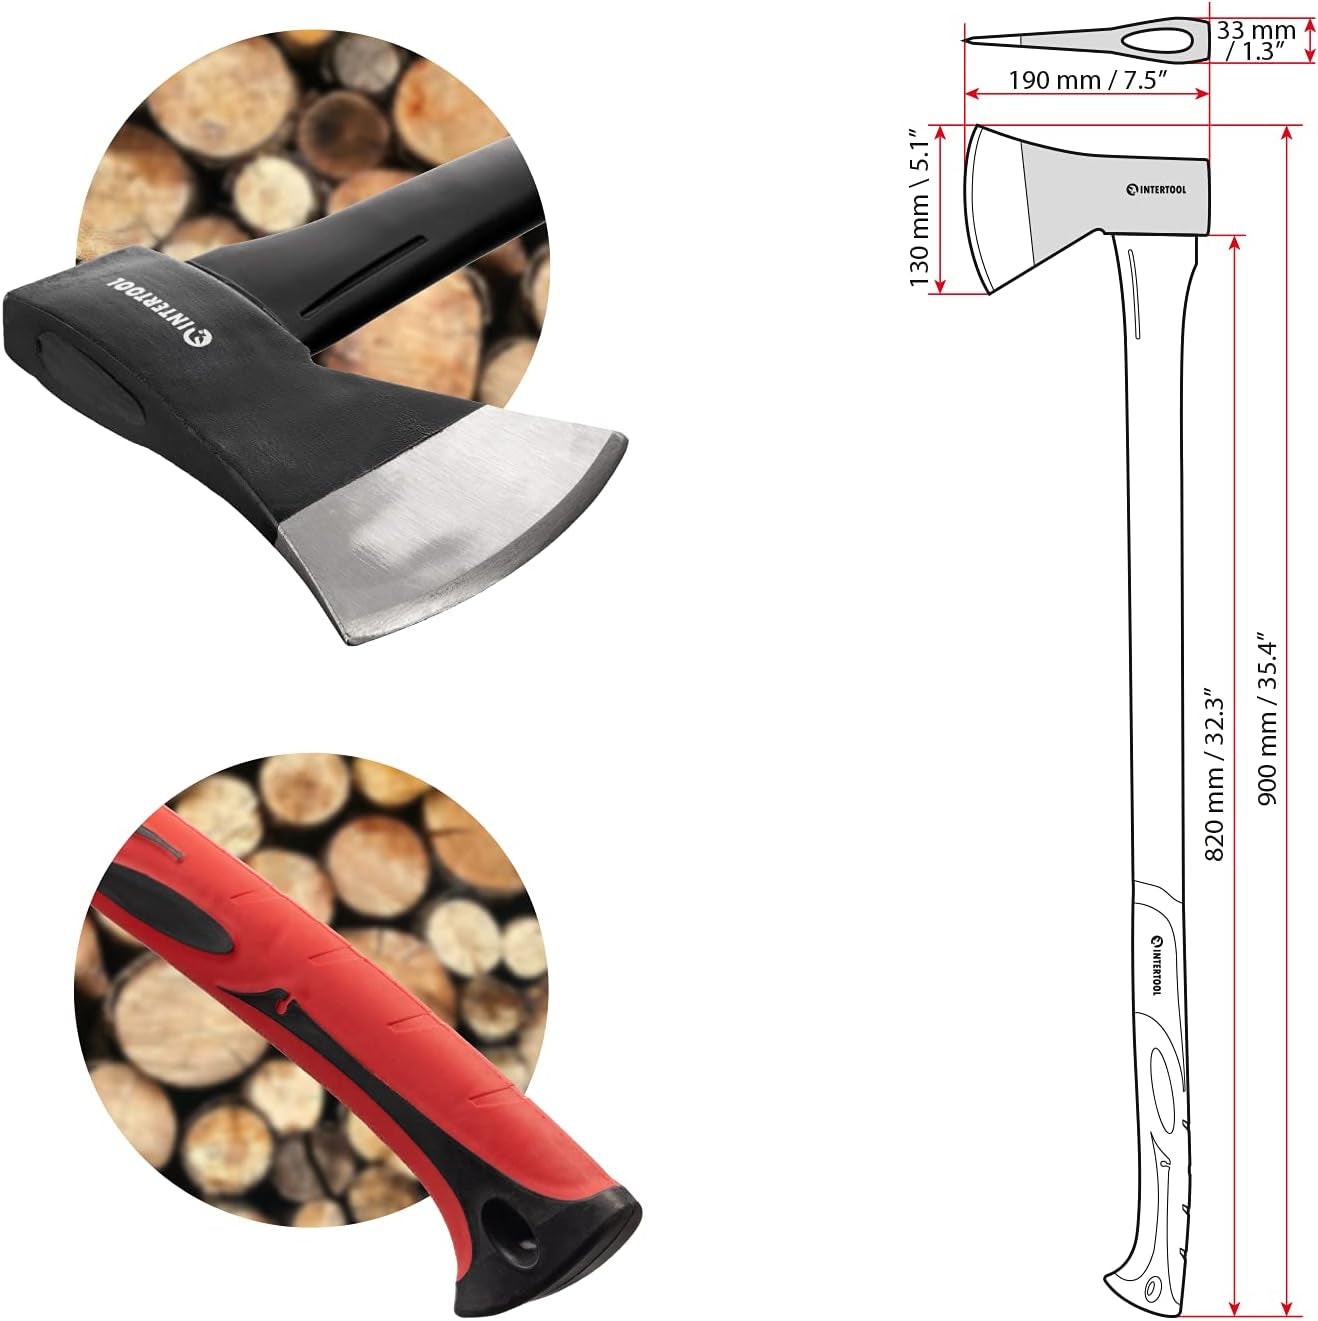 36” Wood Chopping Axe, 2.8 Lbs, Long Tree Felling Ax, Firewood Cutting, Shock Absorbing Fiberglass Anti-Slip Handle with Blade Cover HT-0264